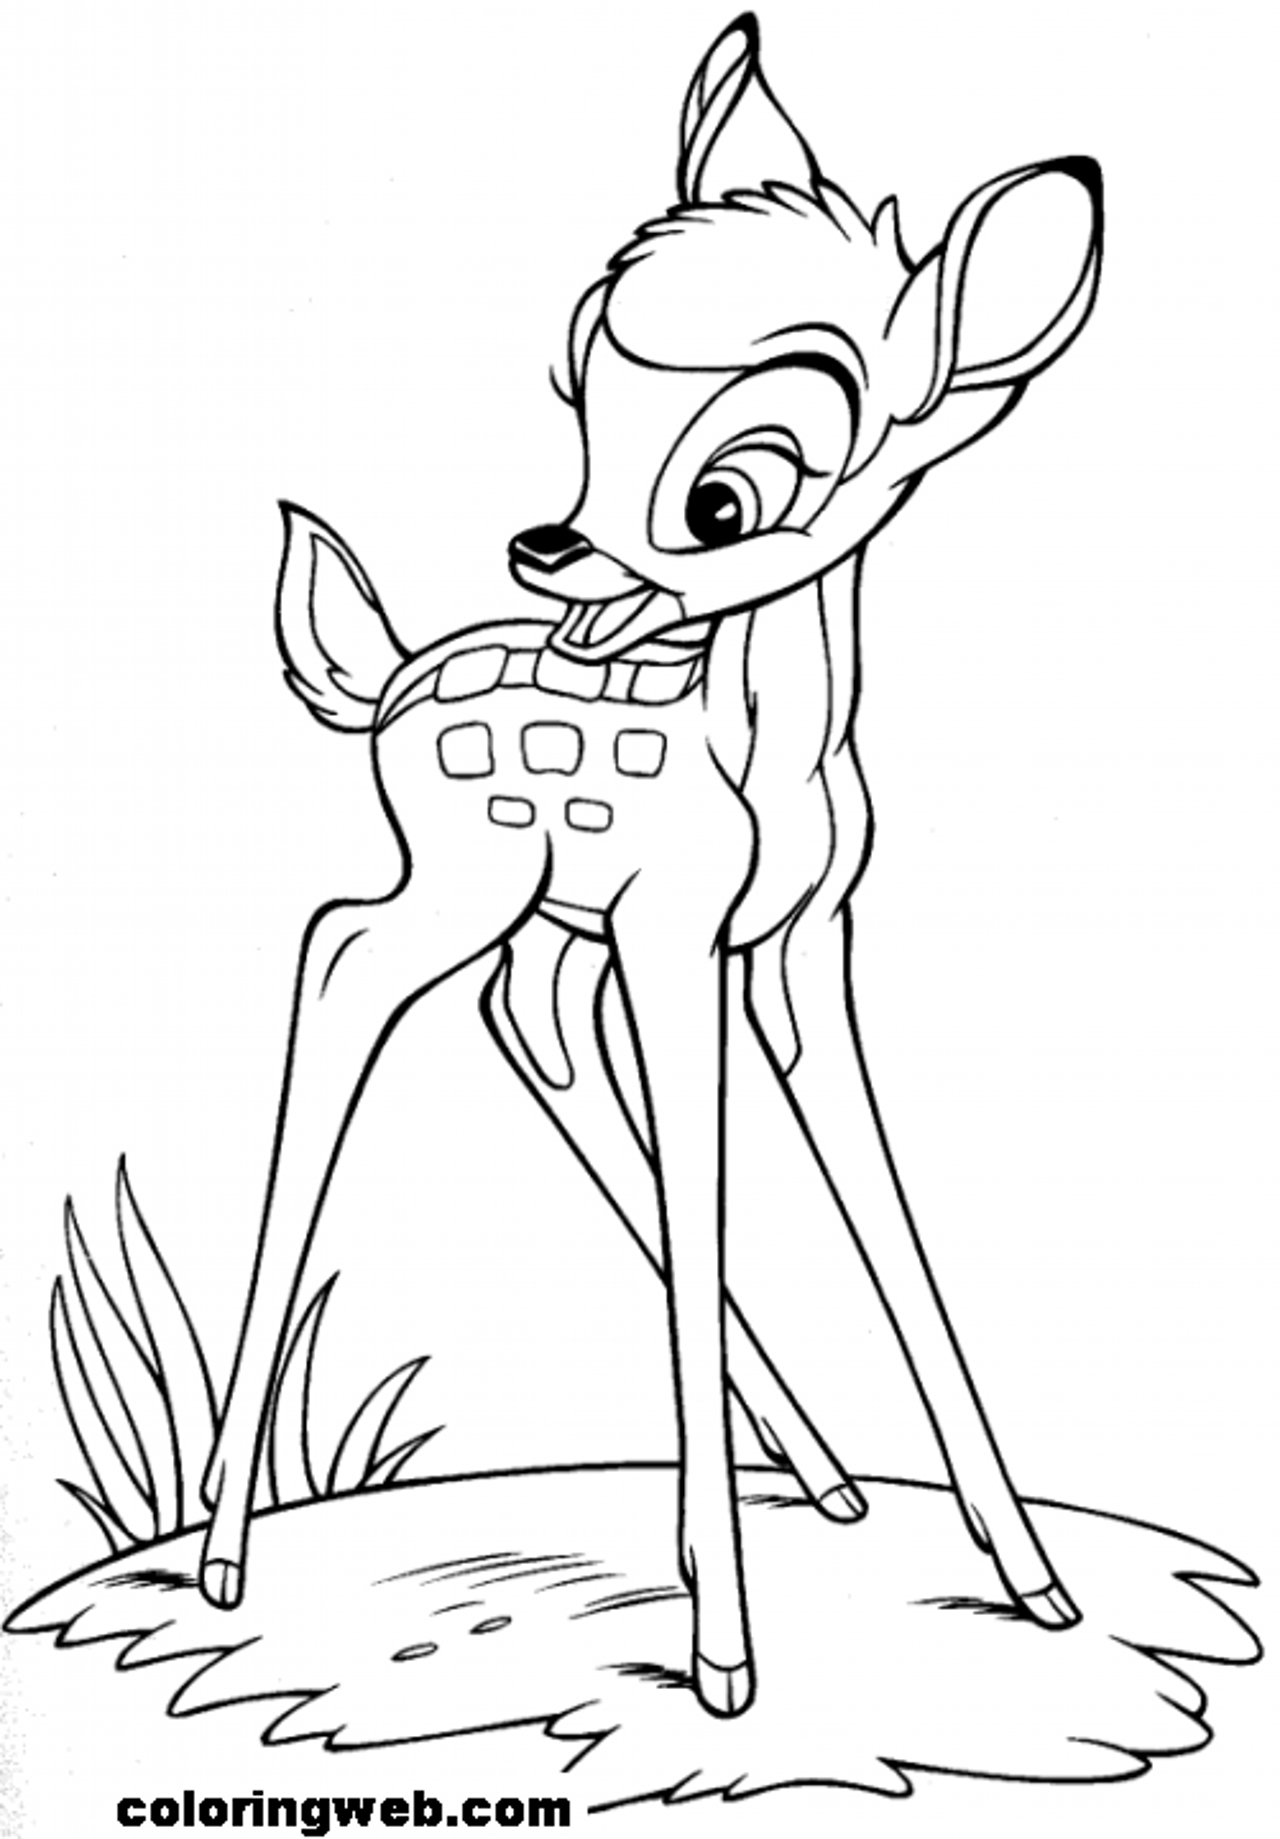 Bambi Coloring Page - Coloring Pages for Kids and for Adults